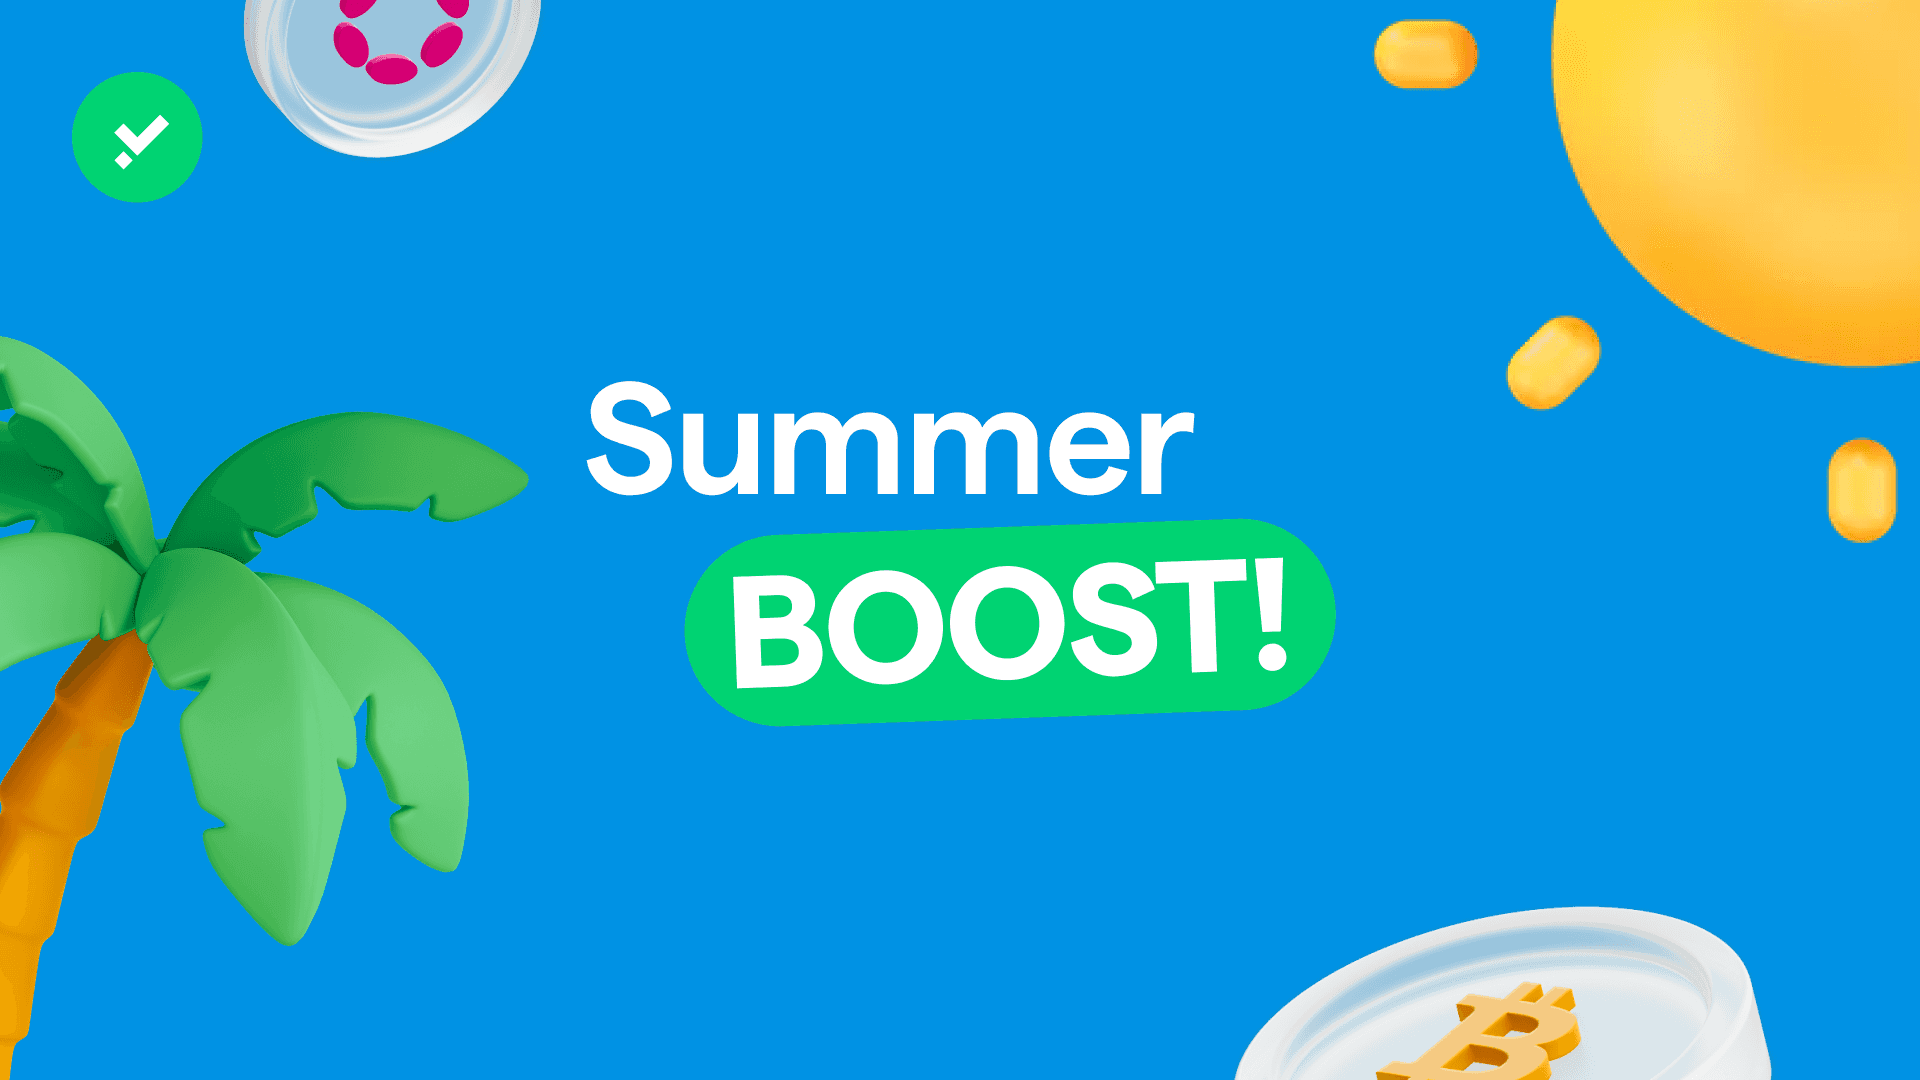 Summer Boost: Top Up and Cash Out Easily